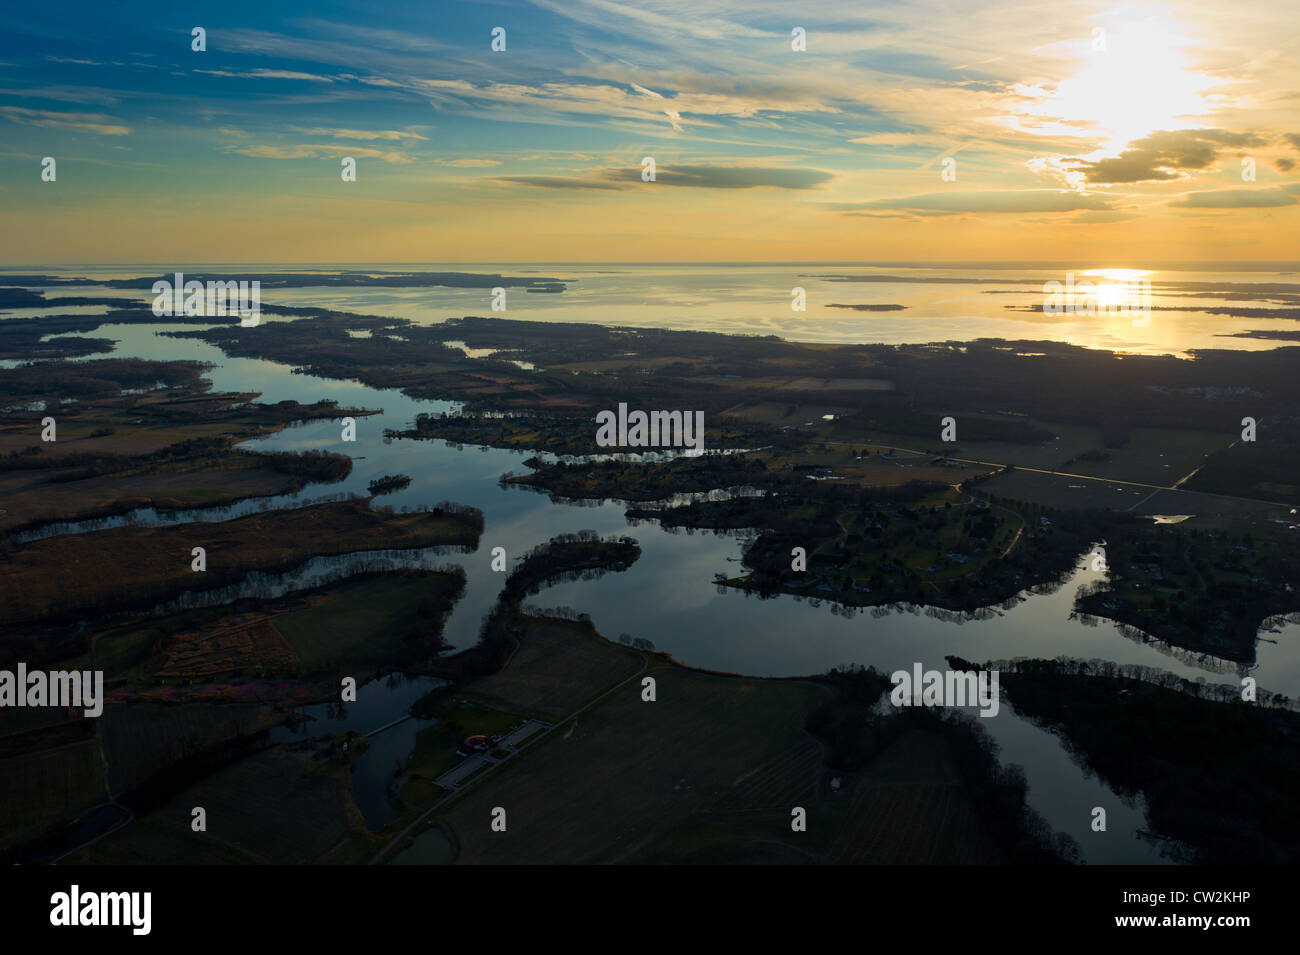 View of the estuaries of the Chesapeake Bay from the sky Stock Photo